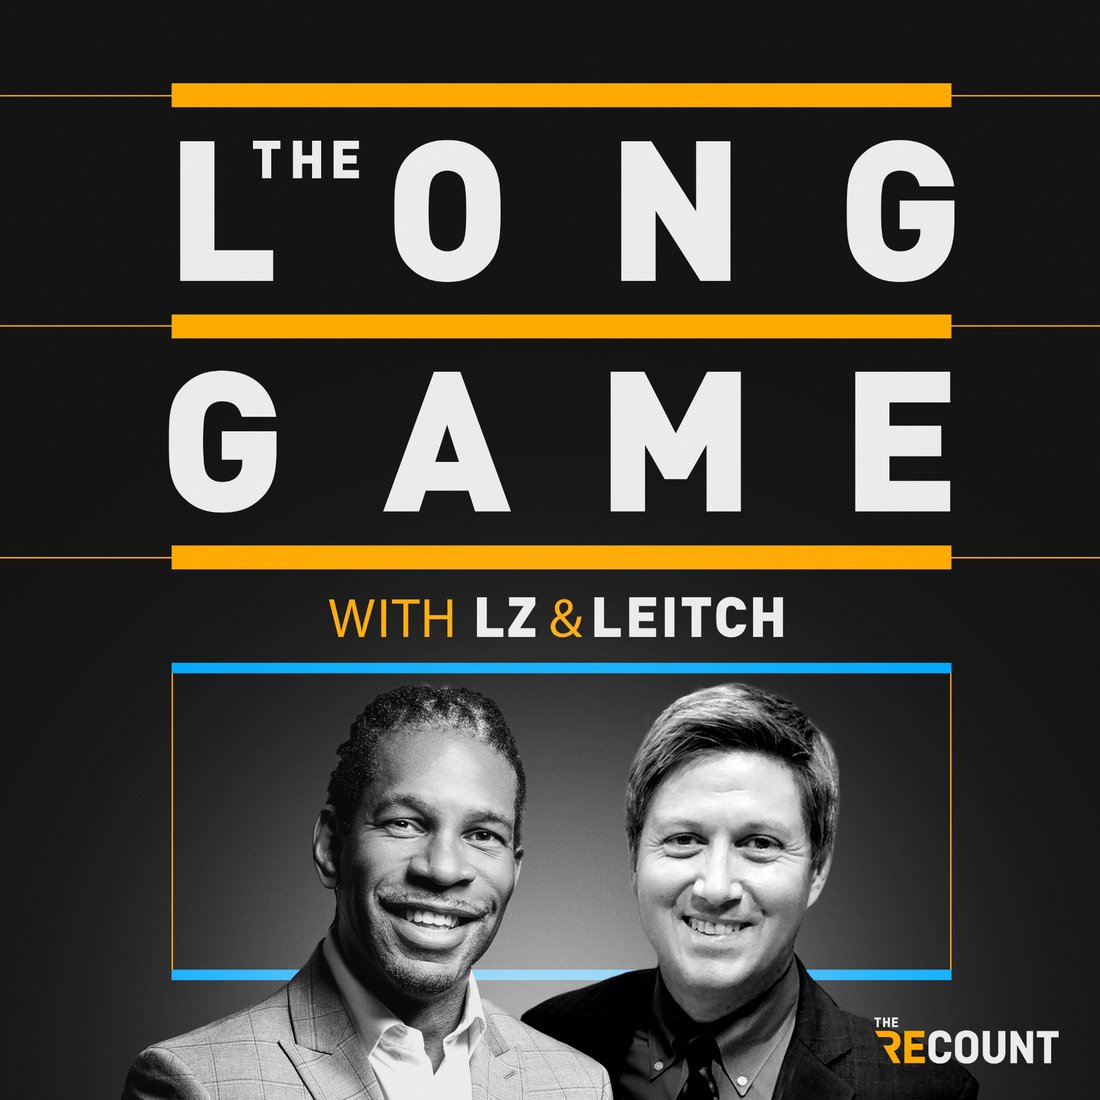 The Long Game with LZ & Leitch